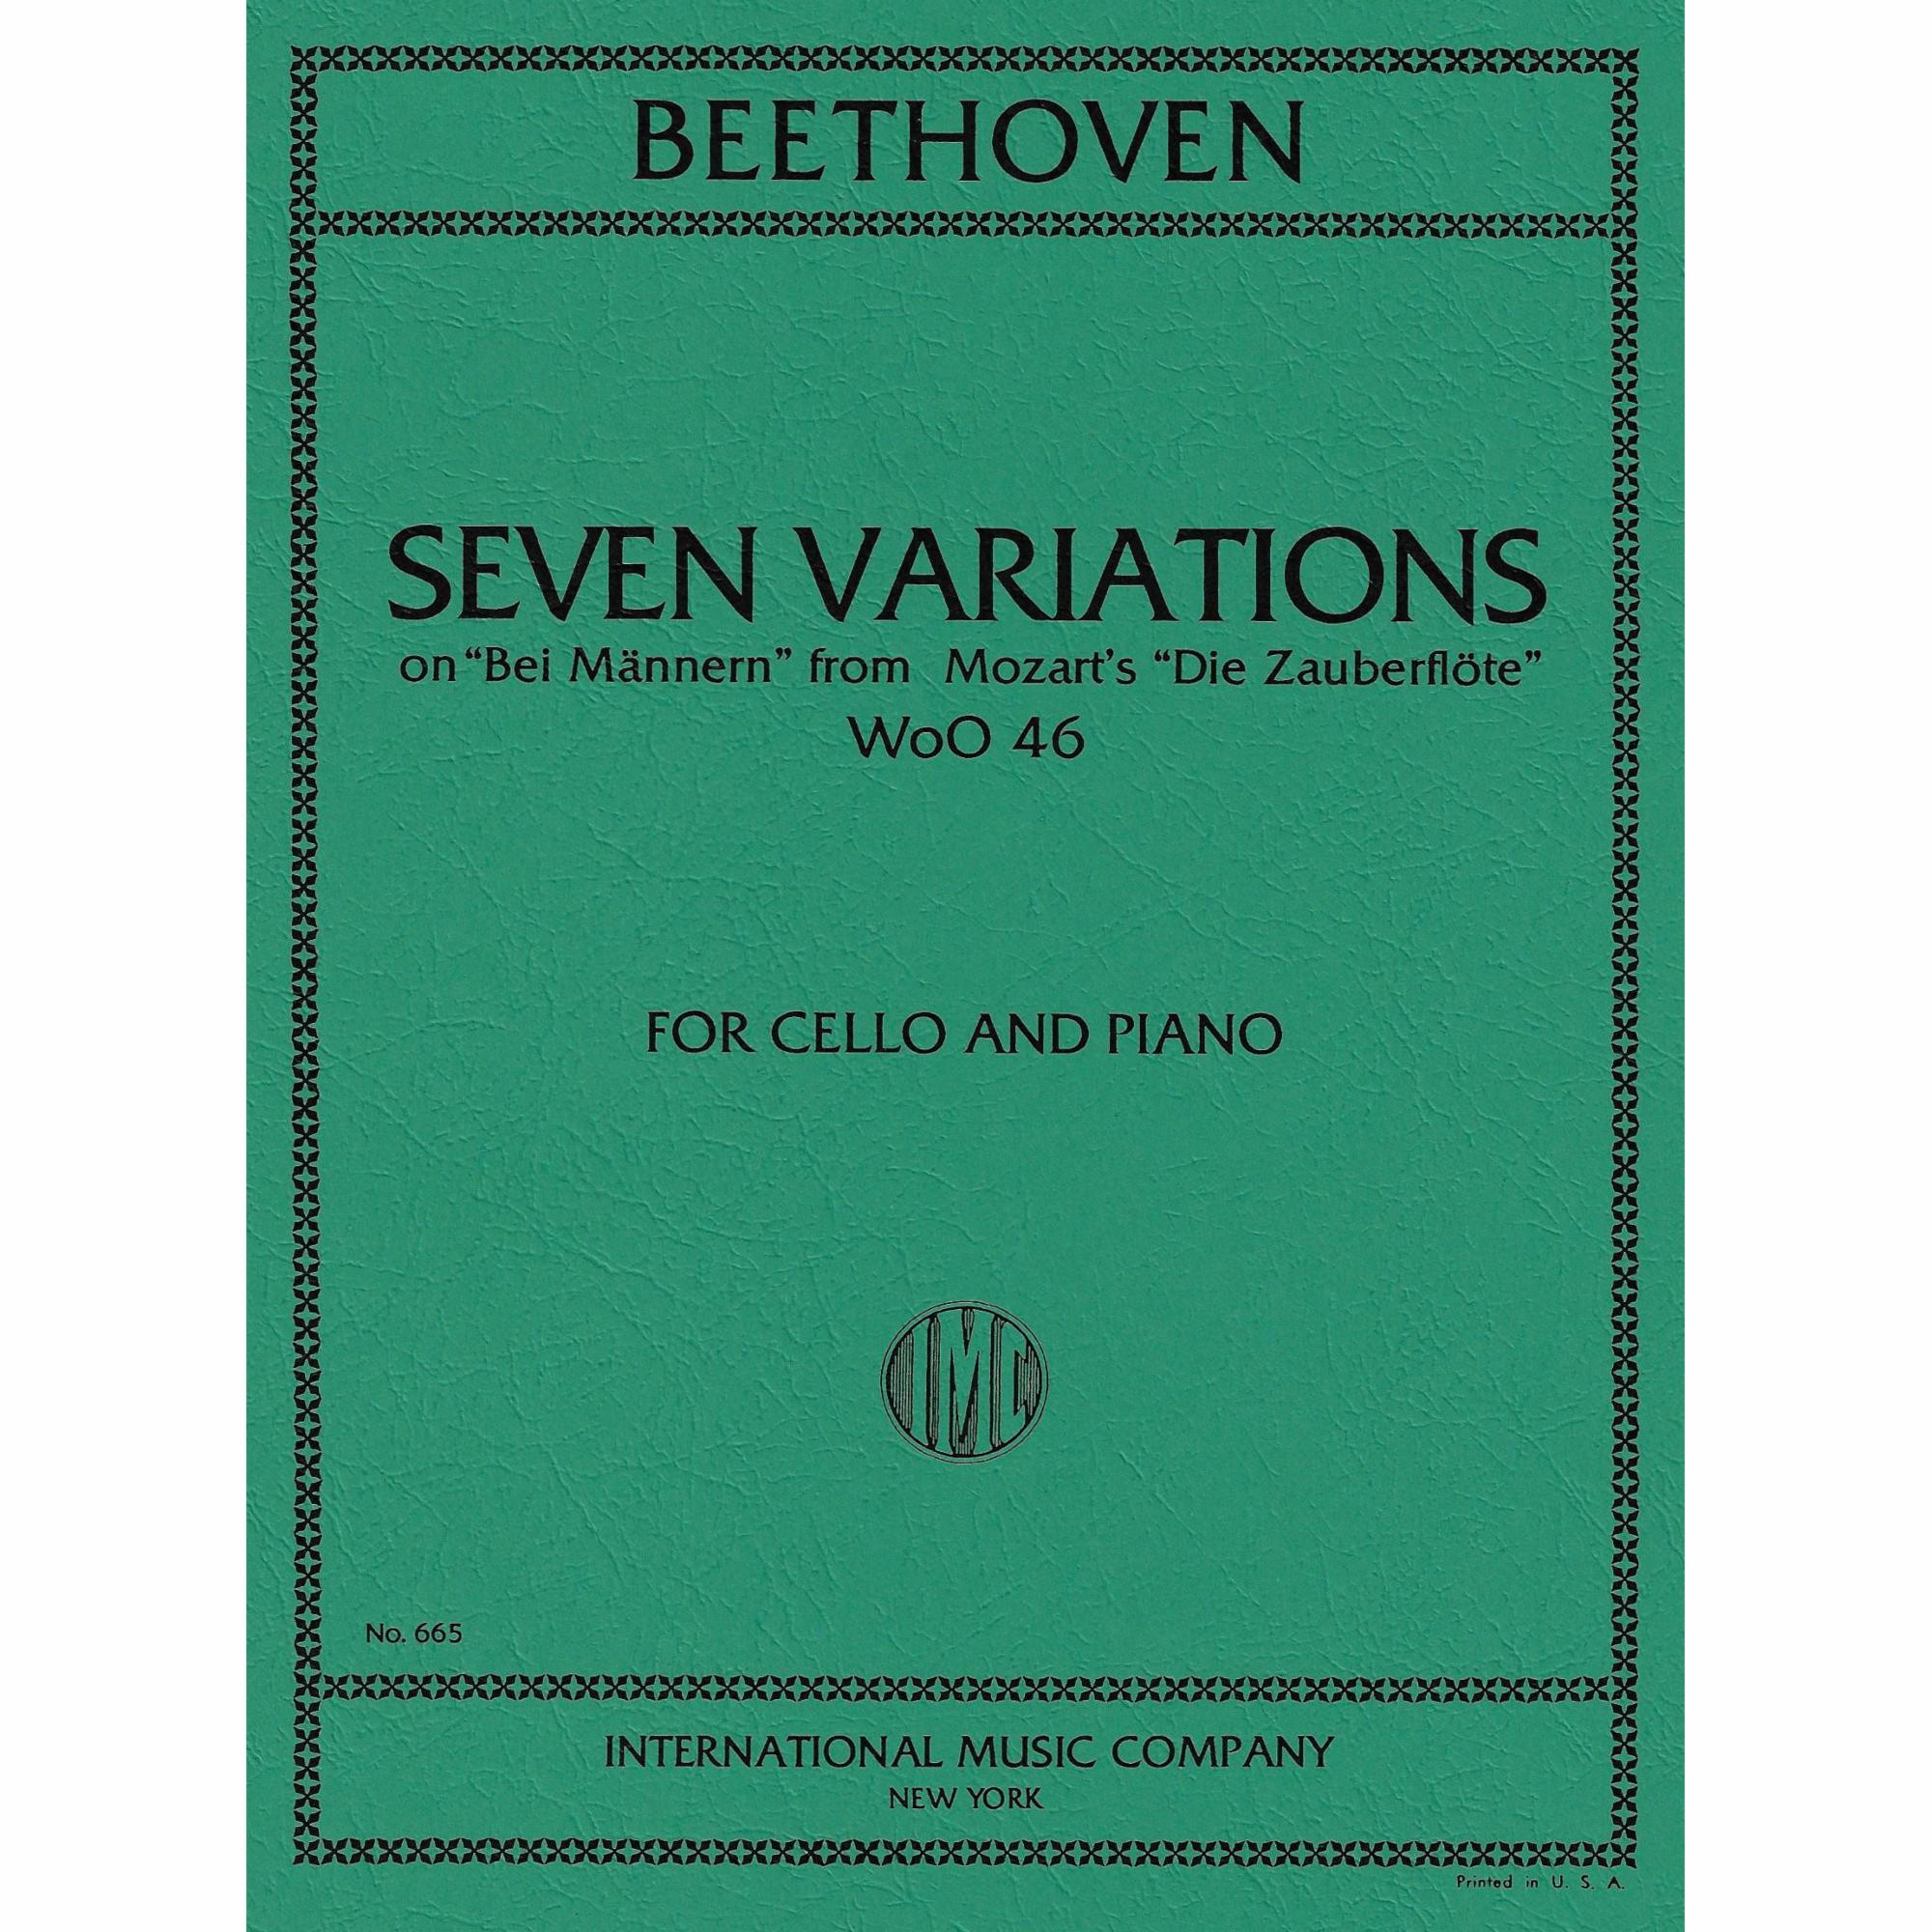 7 Variations on 'Bei Mannern', WoO 46 for Cello and Piano